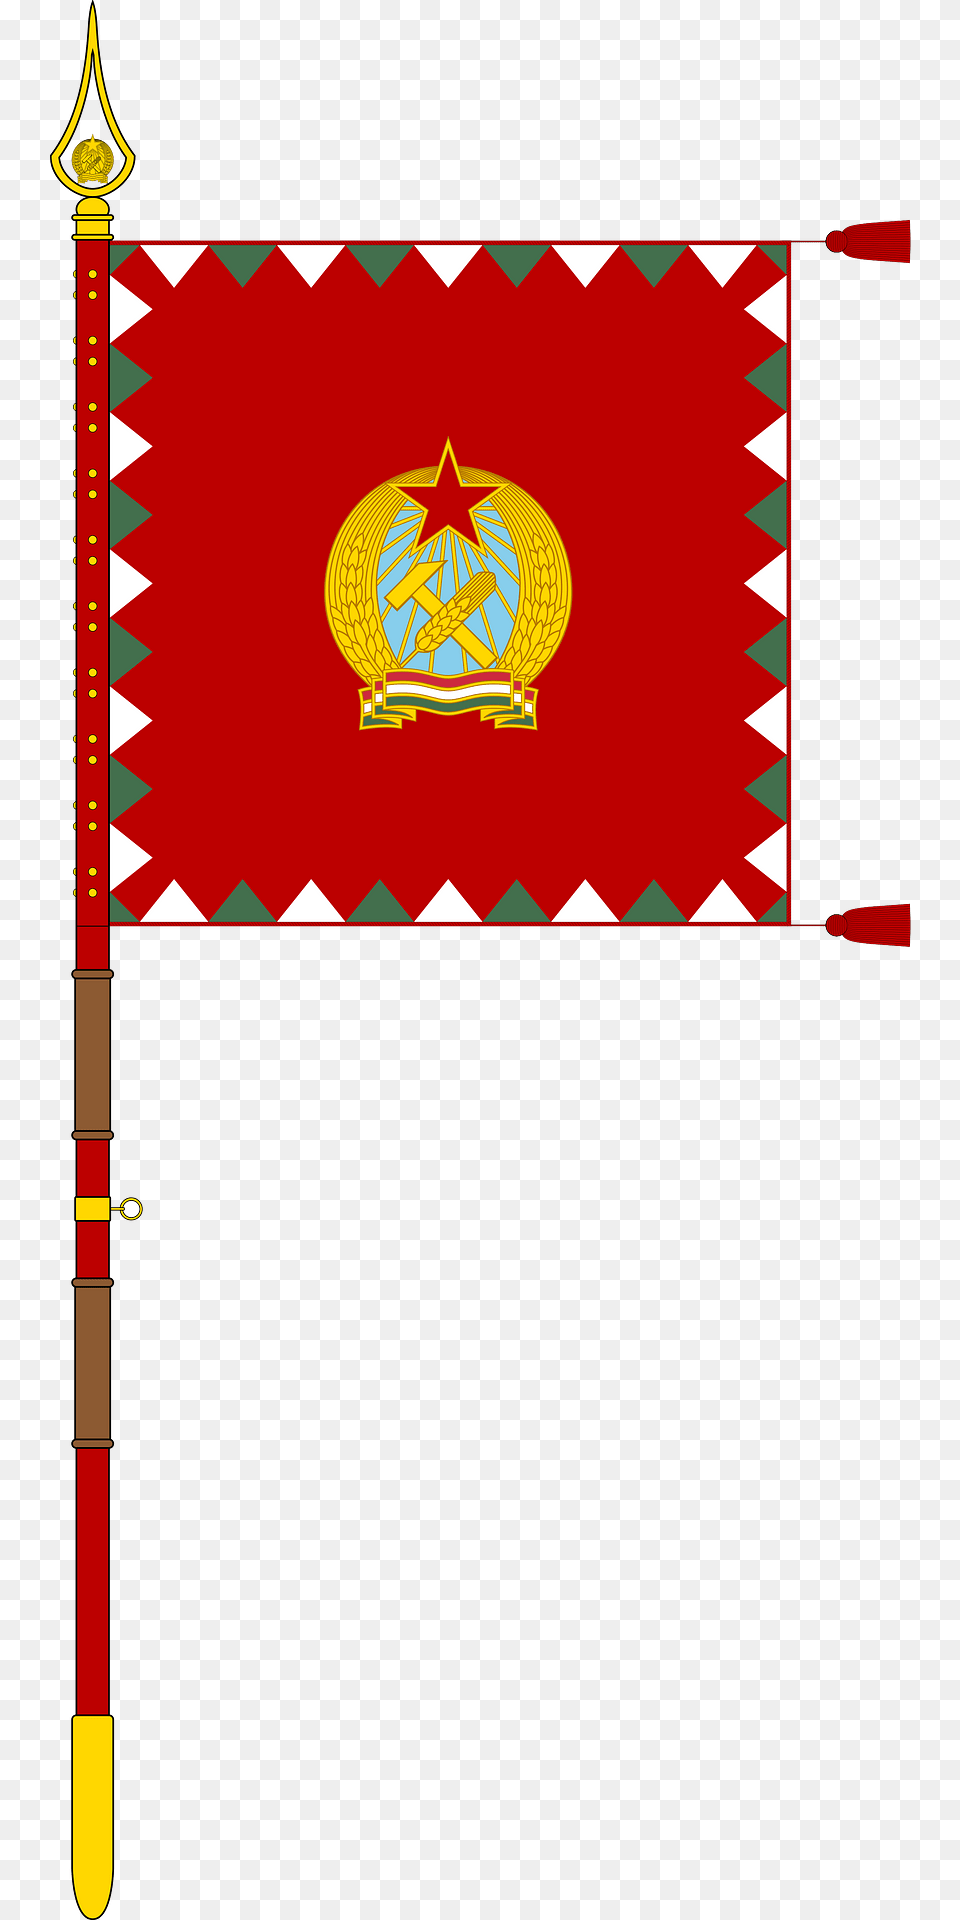 Cavalry Standard Of The Hungarian People39s Army 1950 1957 With Staff Clipart Png Image